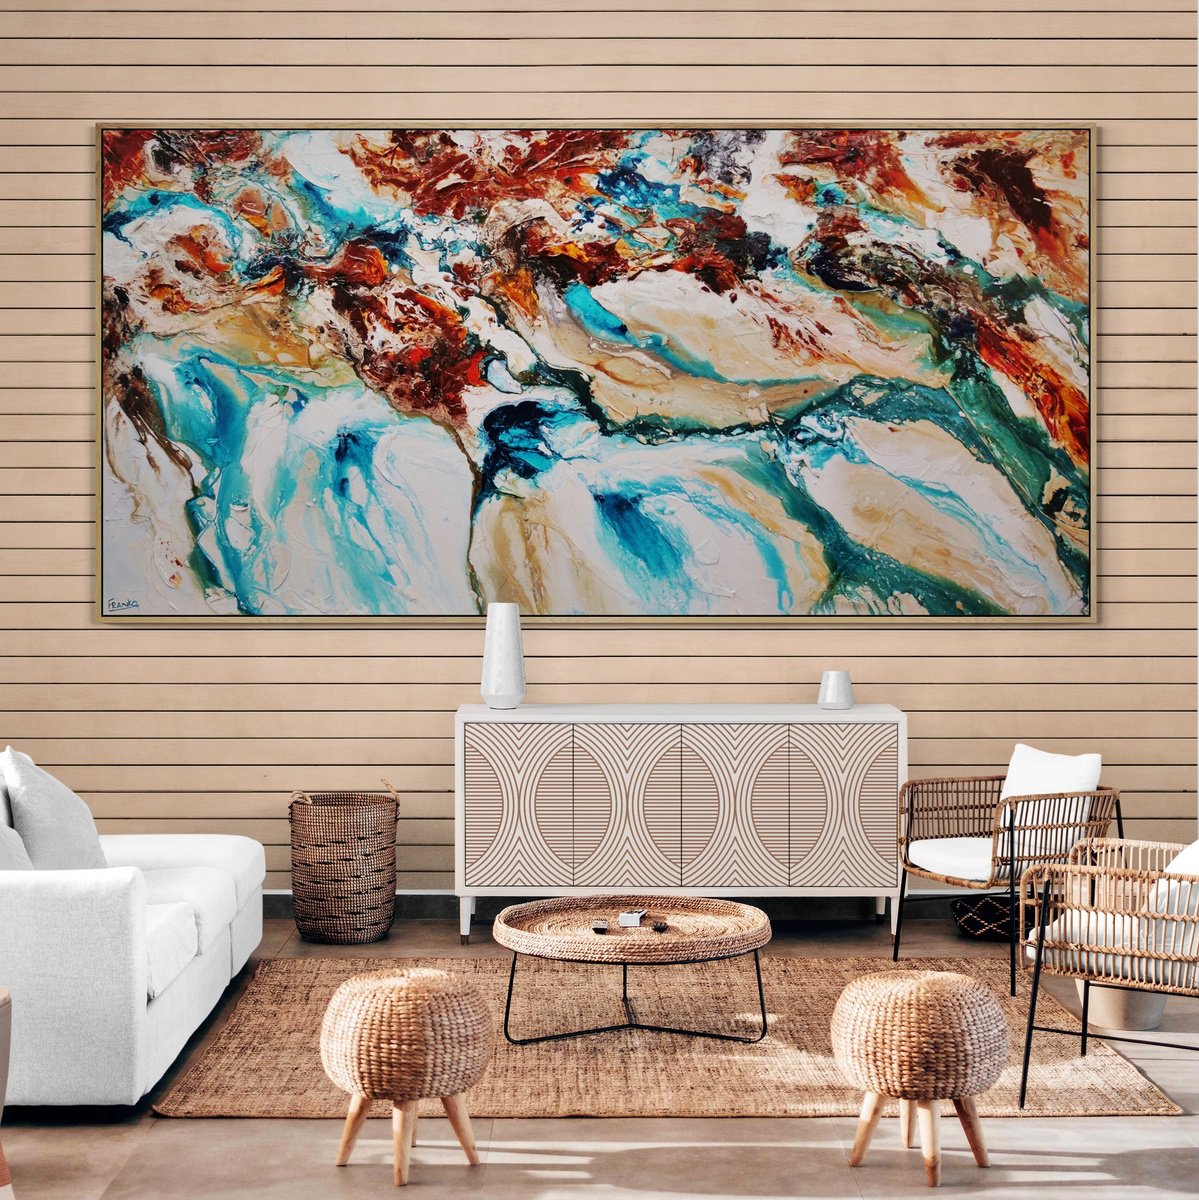 Southern Rock 240cm x 120cm Textured Abstract Art by Franko